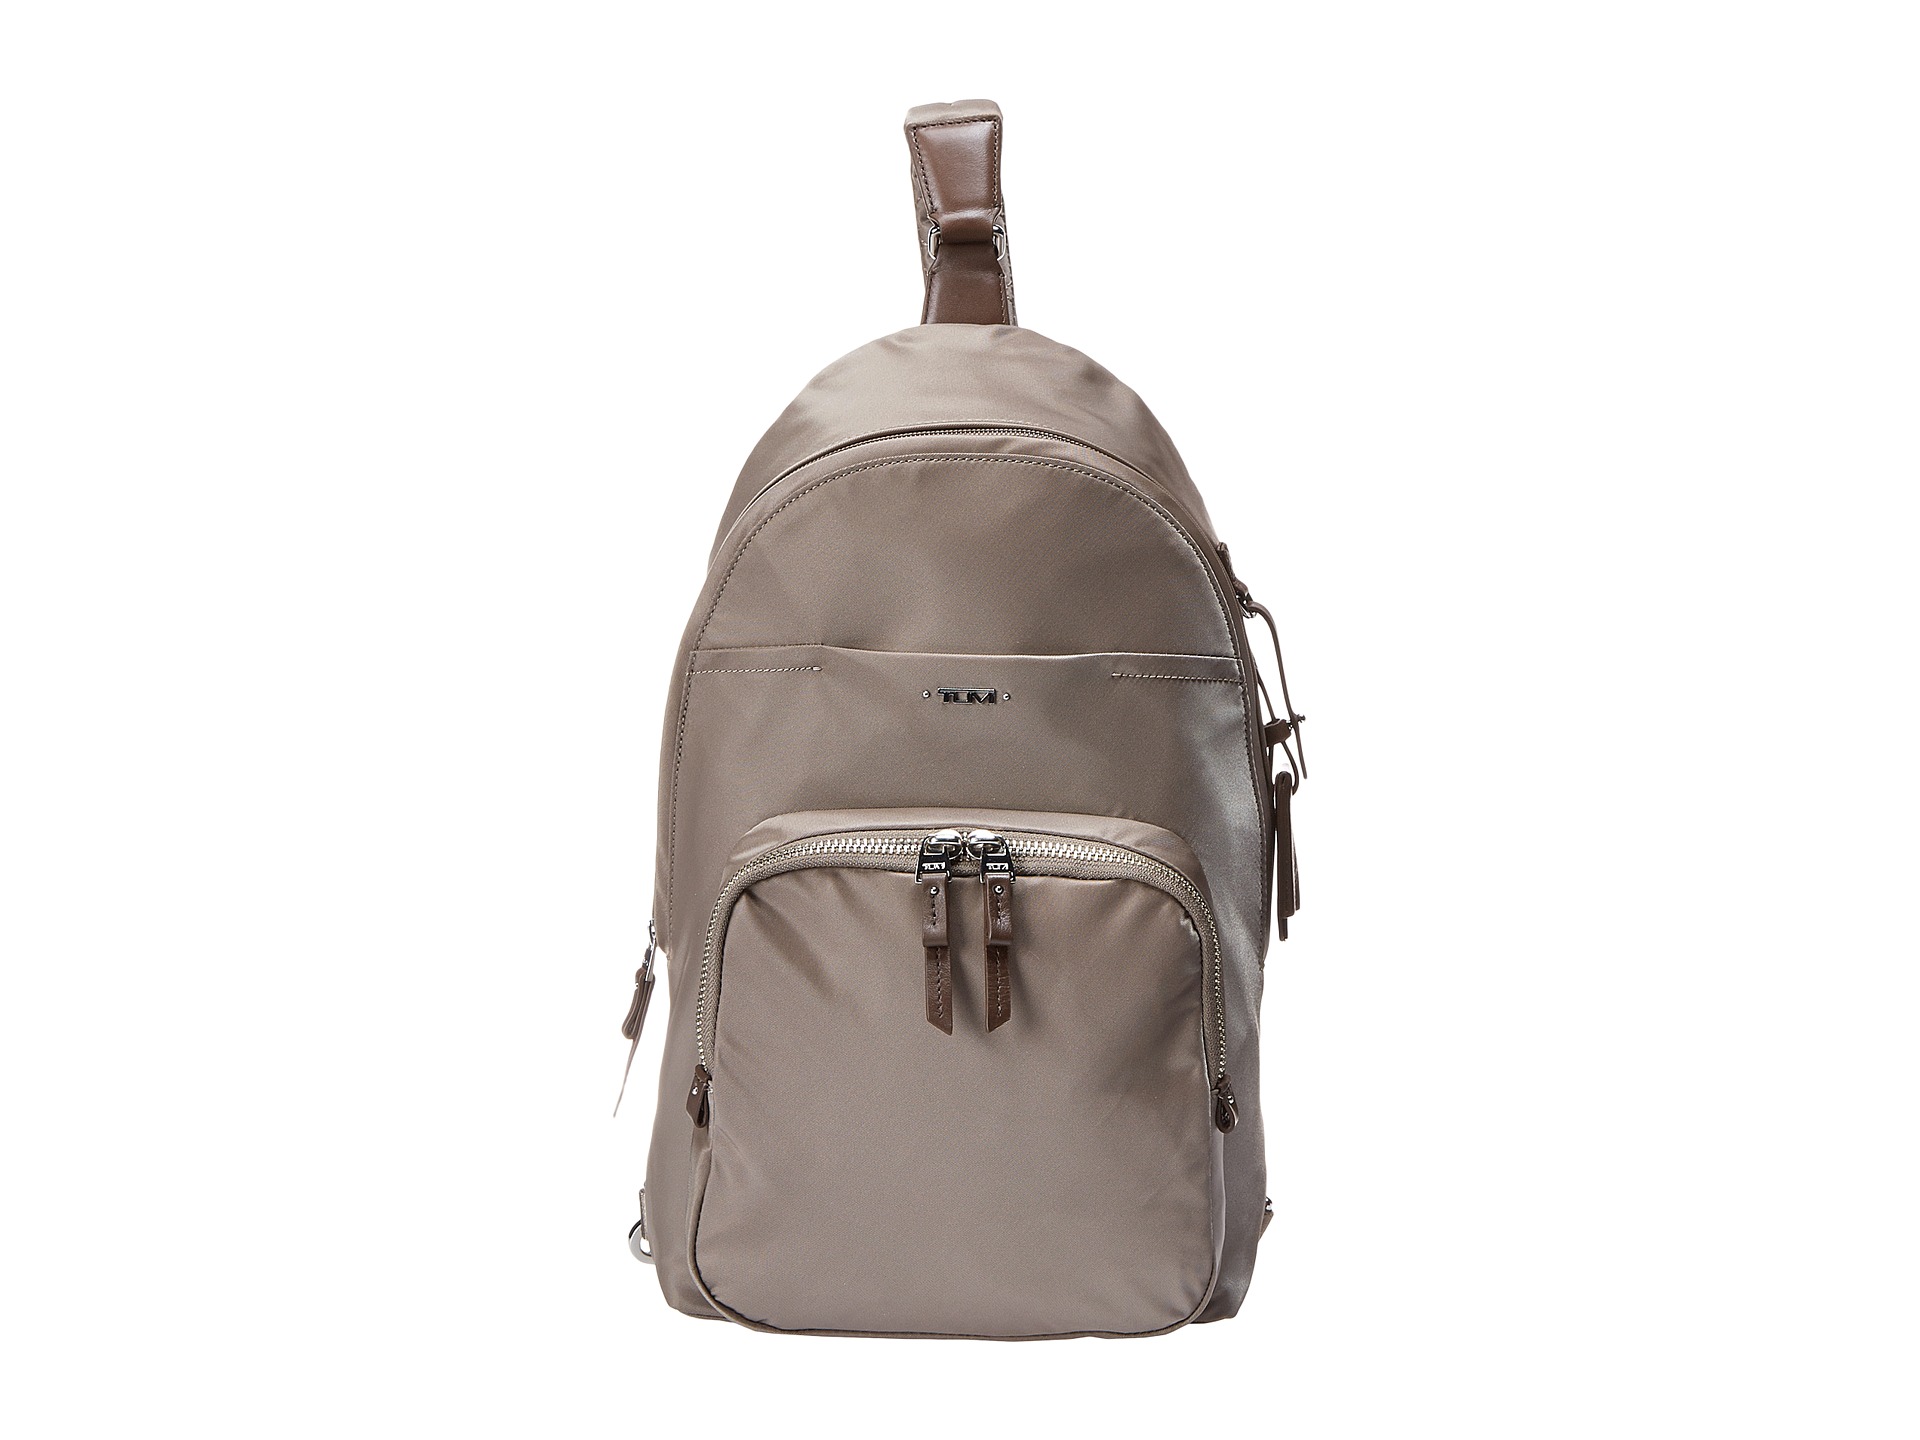 Tumi Voyageur Brive Sling Backpack - Zappos.com Free Shipping BOTH Ways